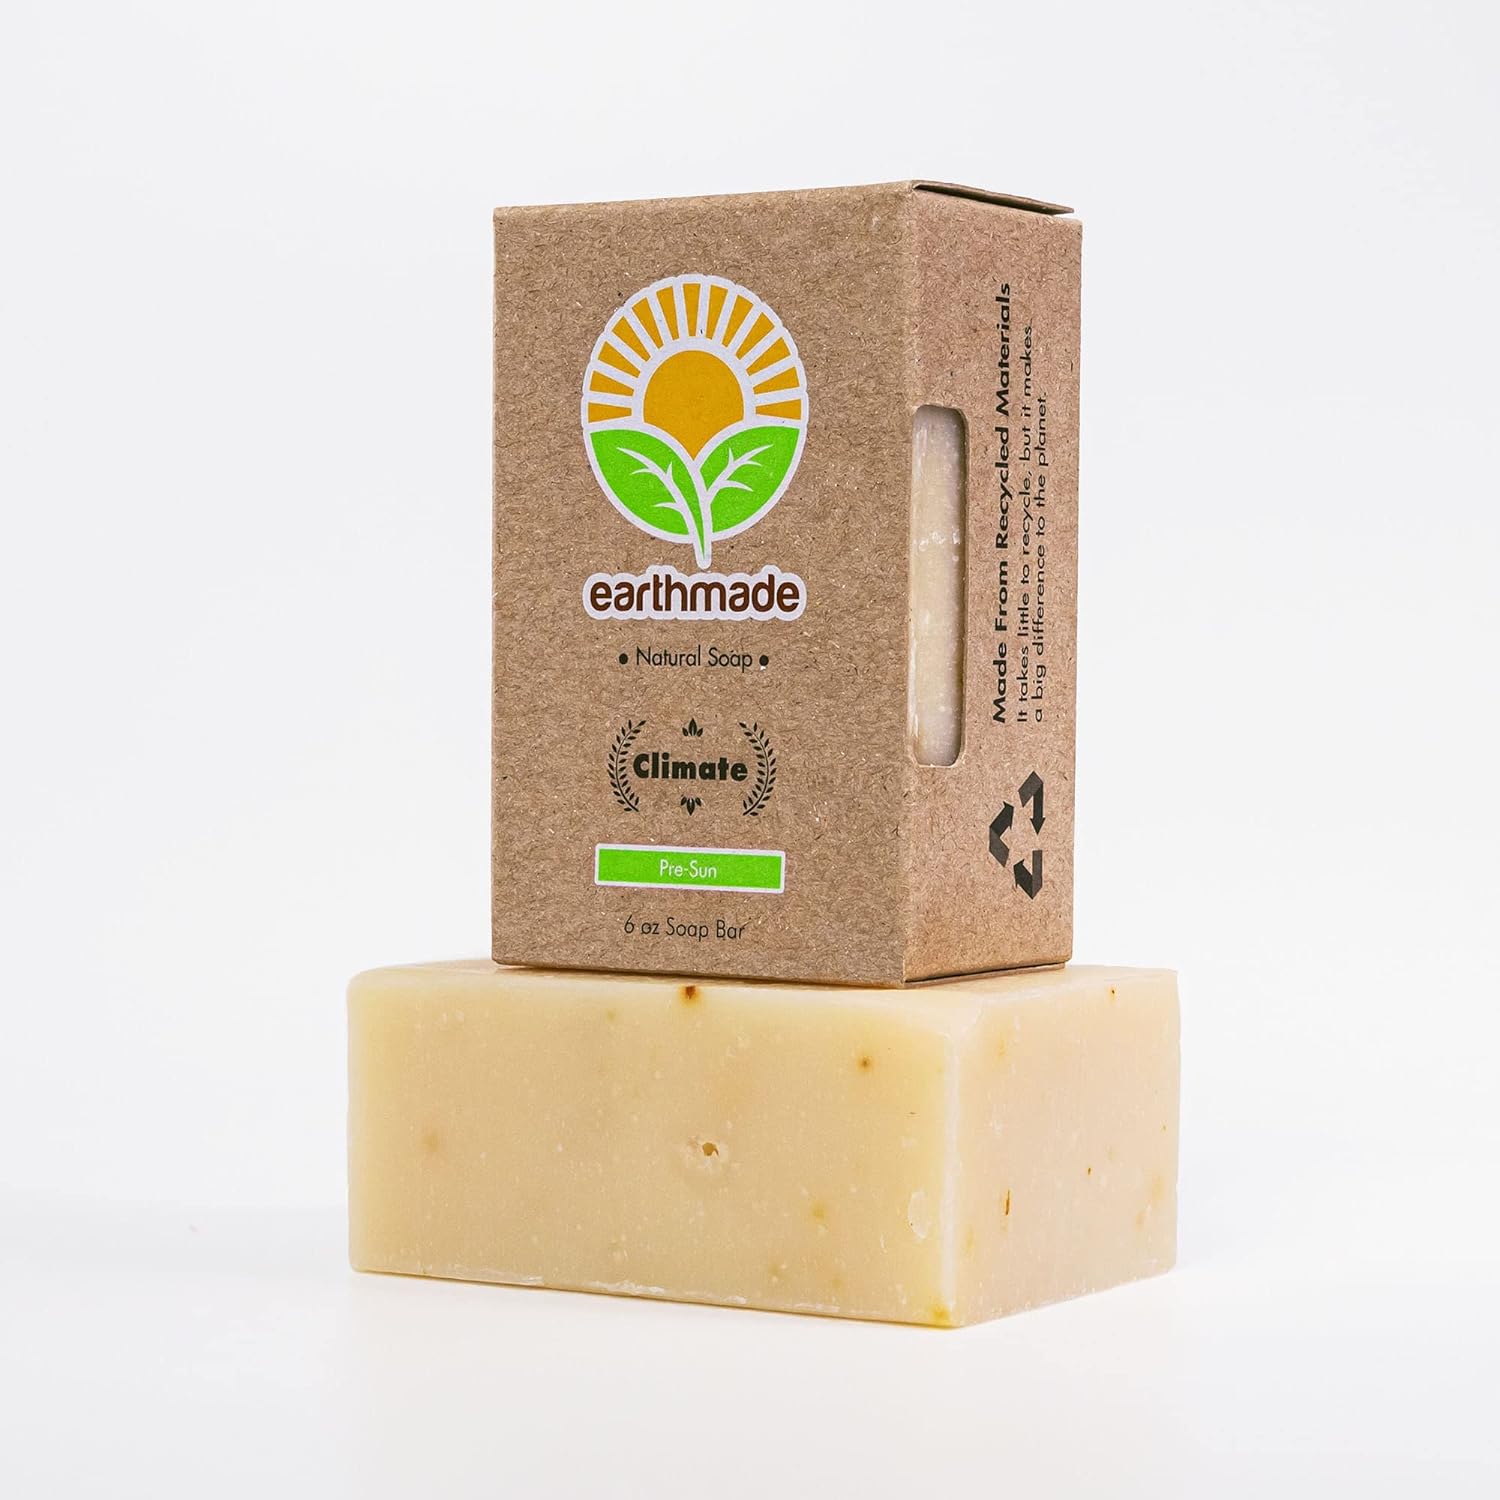 Earthmade Climate Sunscreen Handmade Moisturizing Bar Soap|Organic Body and Face Soap with Marula, Argan and Moringa Extract|Cold-Processed I No Harsh Chemicals|Organic| No Preservatives| Cruelty Free| SLS Free ( 1 Bar Soap, 6 )